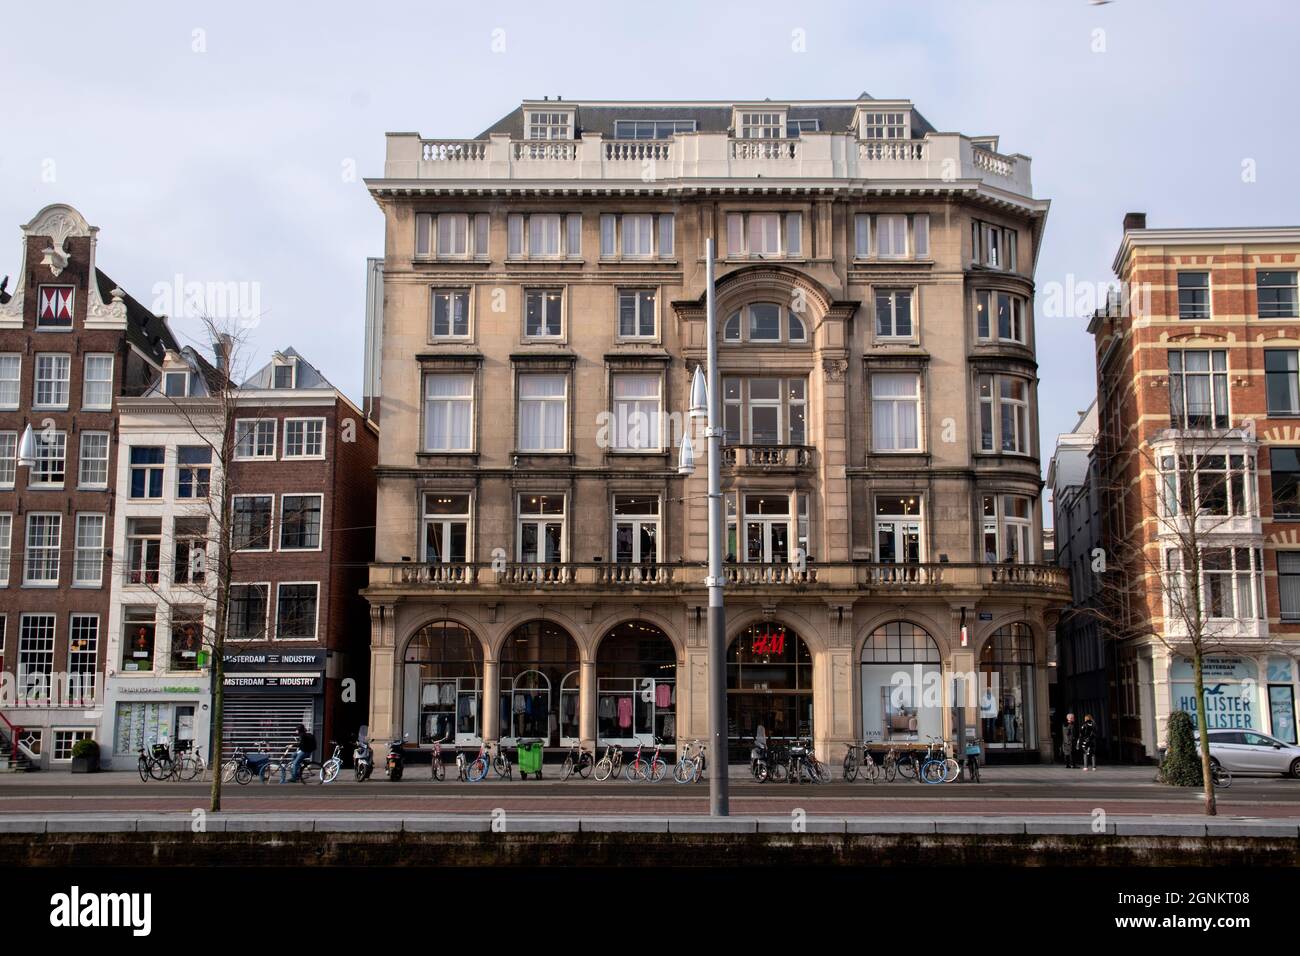 H&M Store At The Rokin Street At Amsterdam The Netherlands 2020 Stock Photo  - Alamy